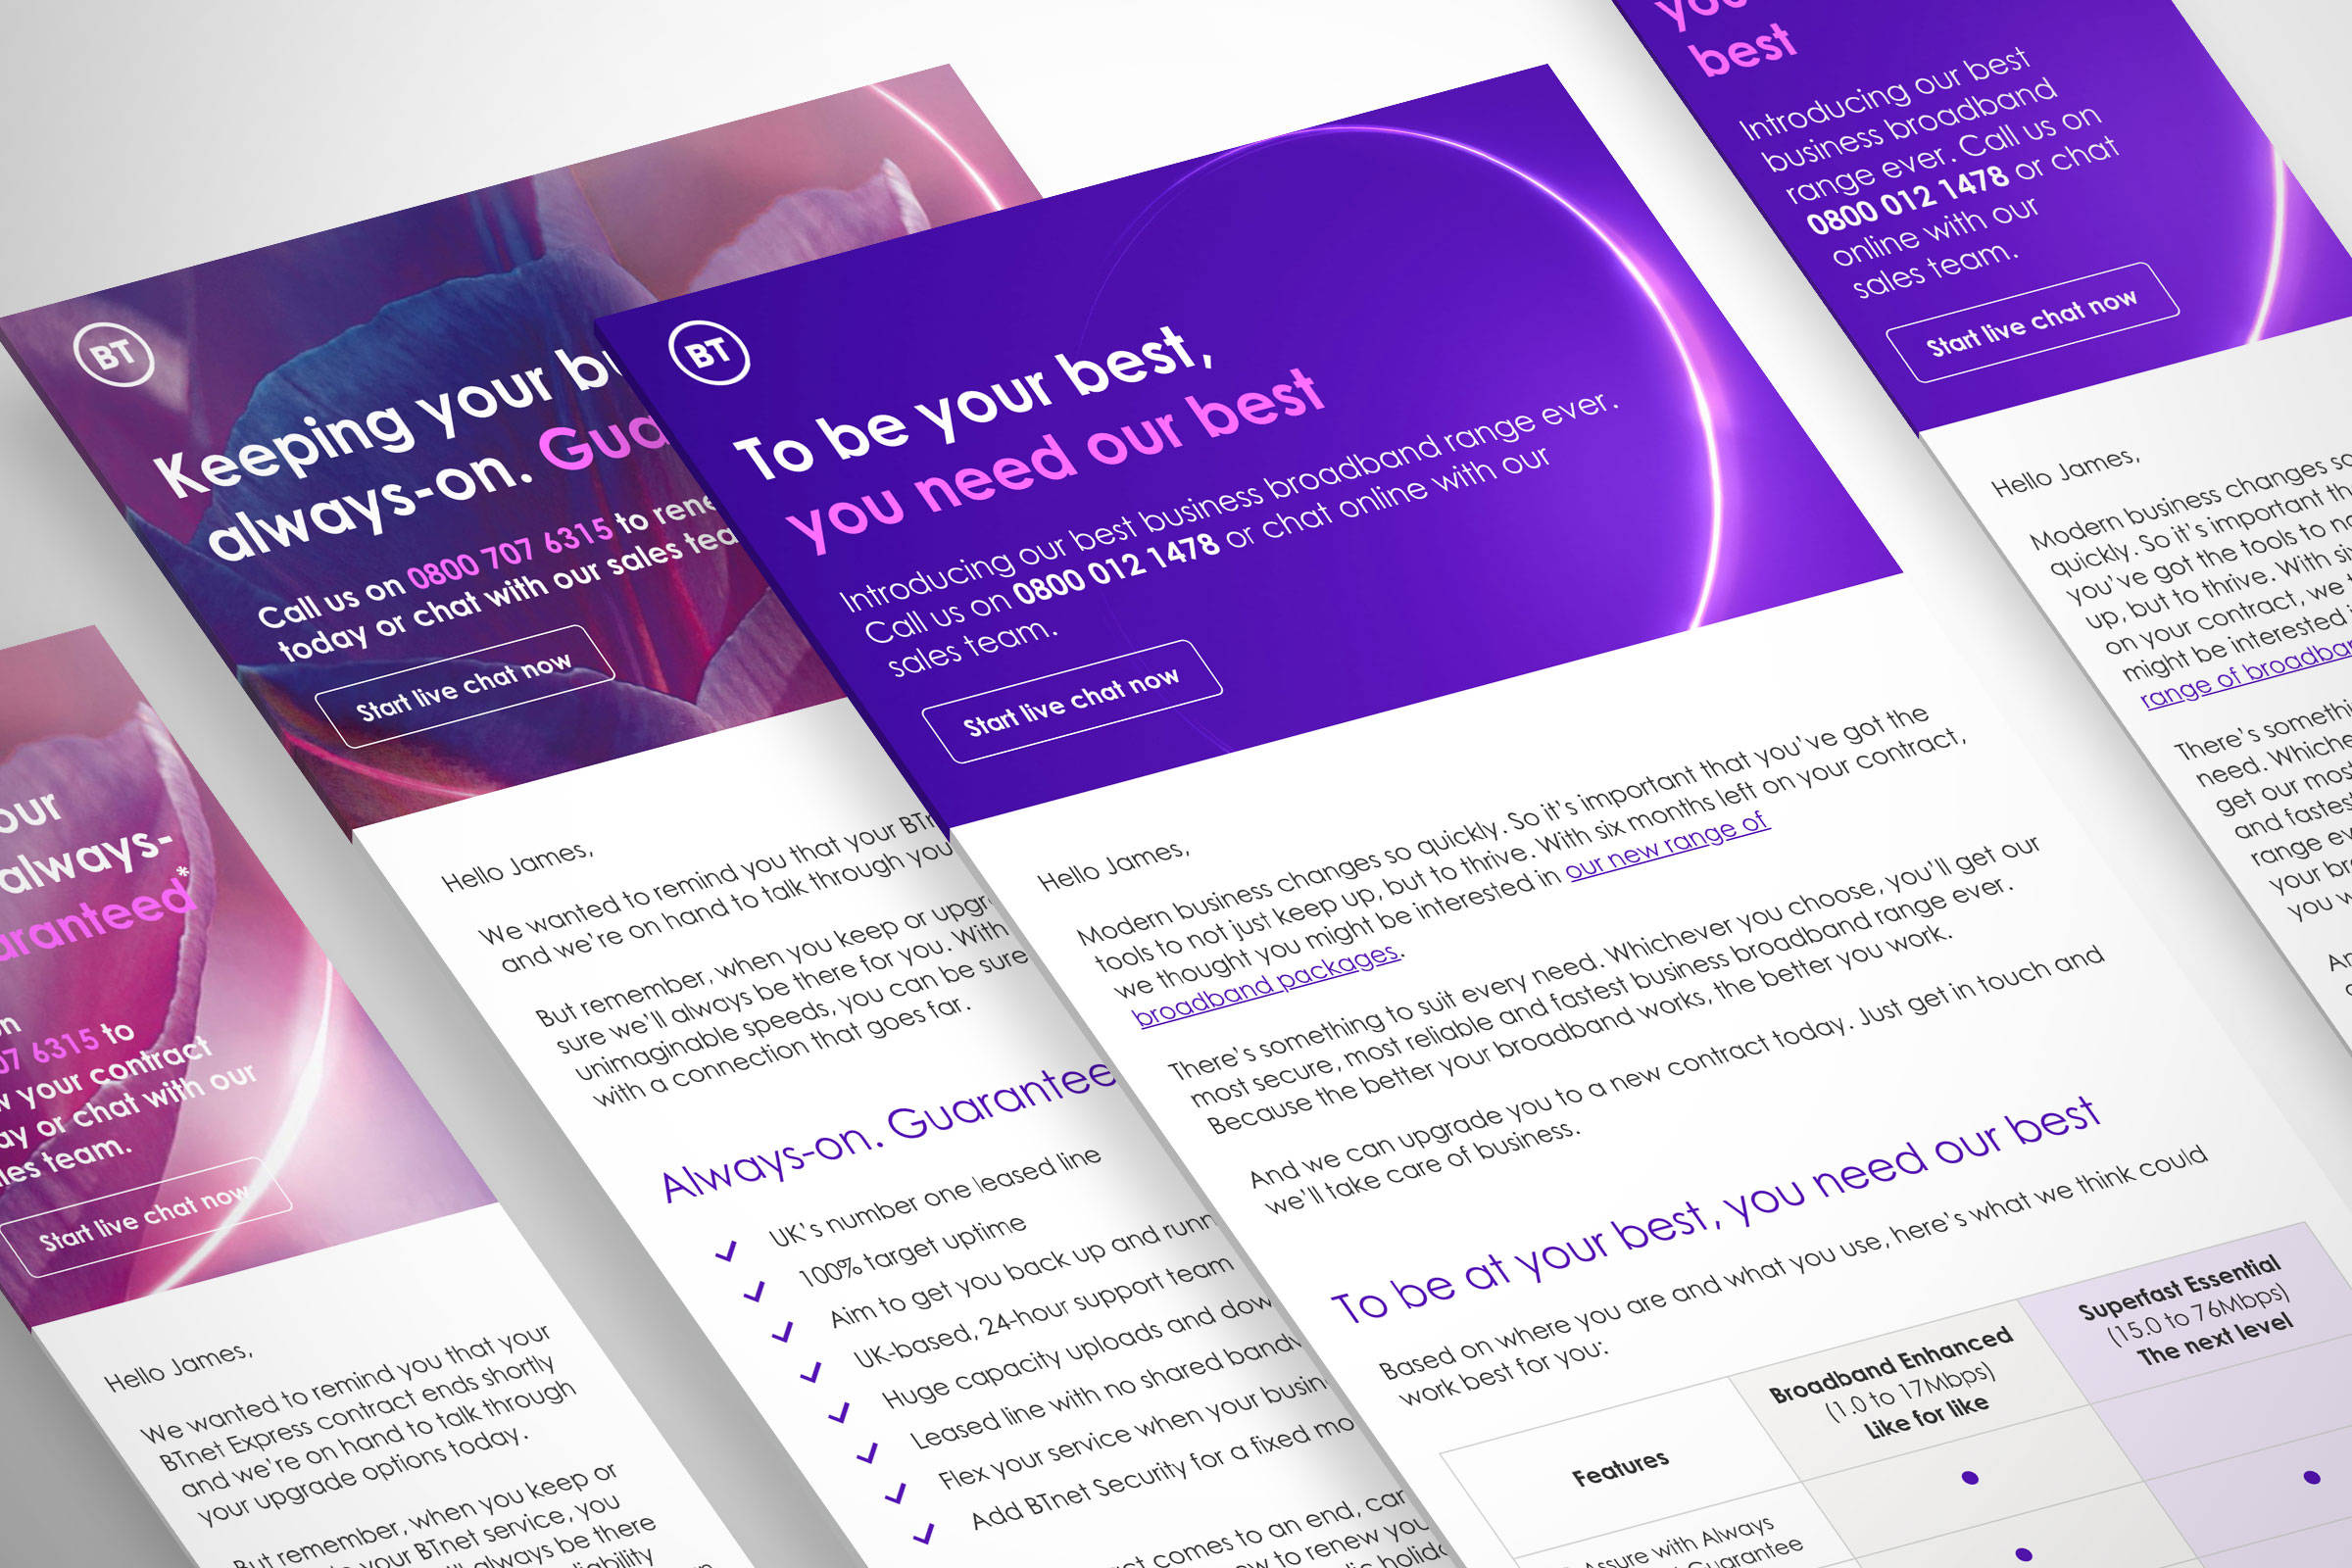 Example email marketing from British Telecom